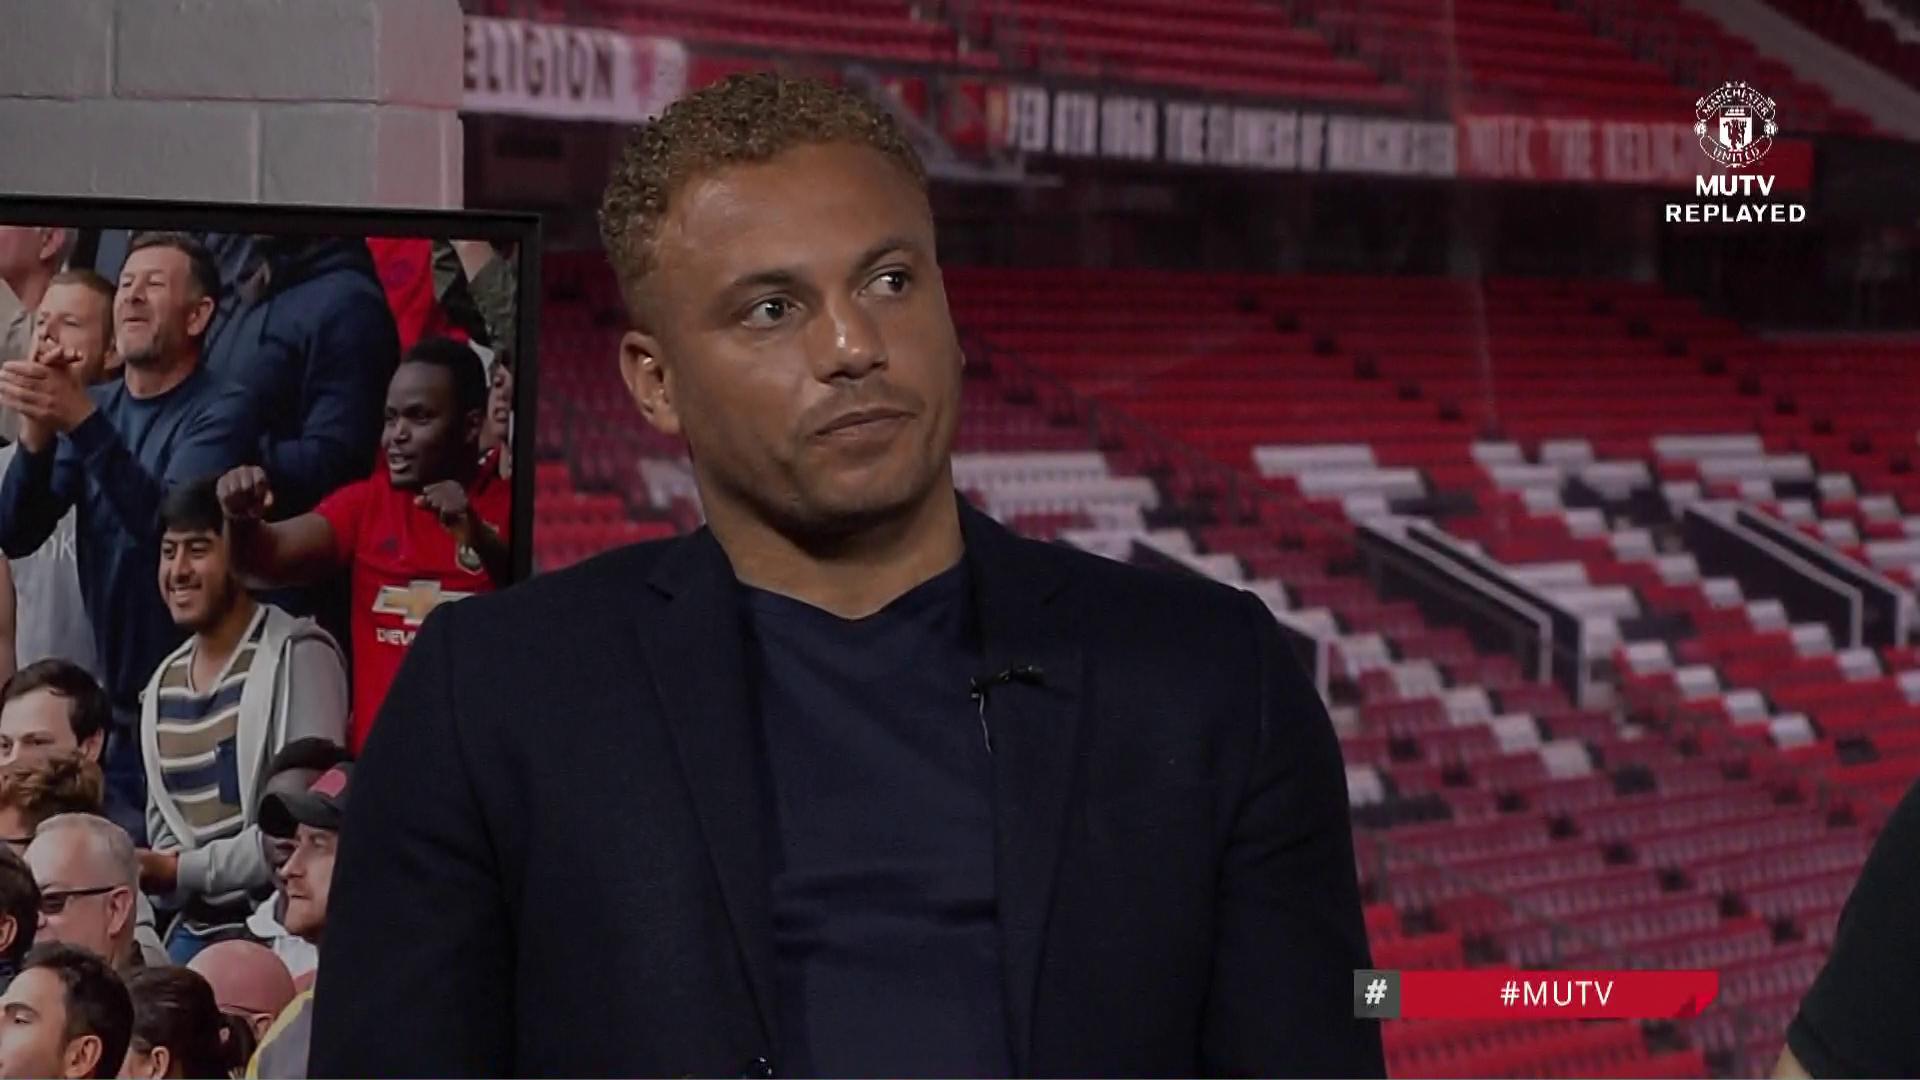 While appearing on The Paddy Crerand Show, Wes Brown heaped praise on centr...